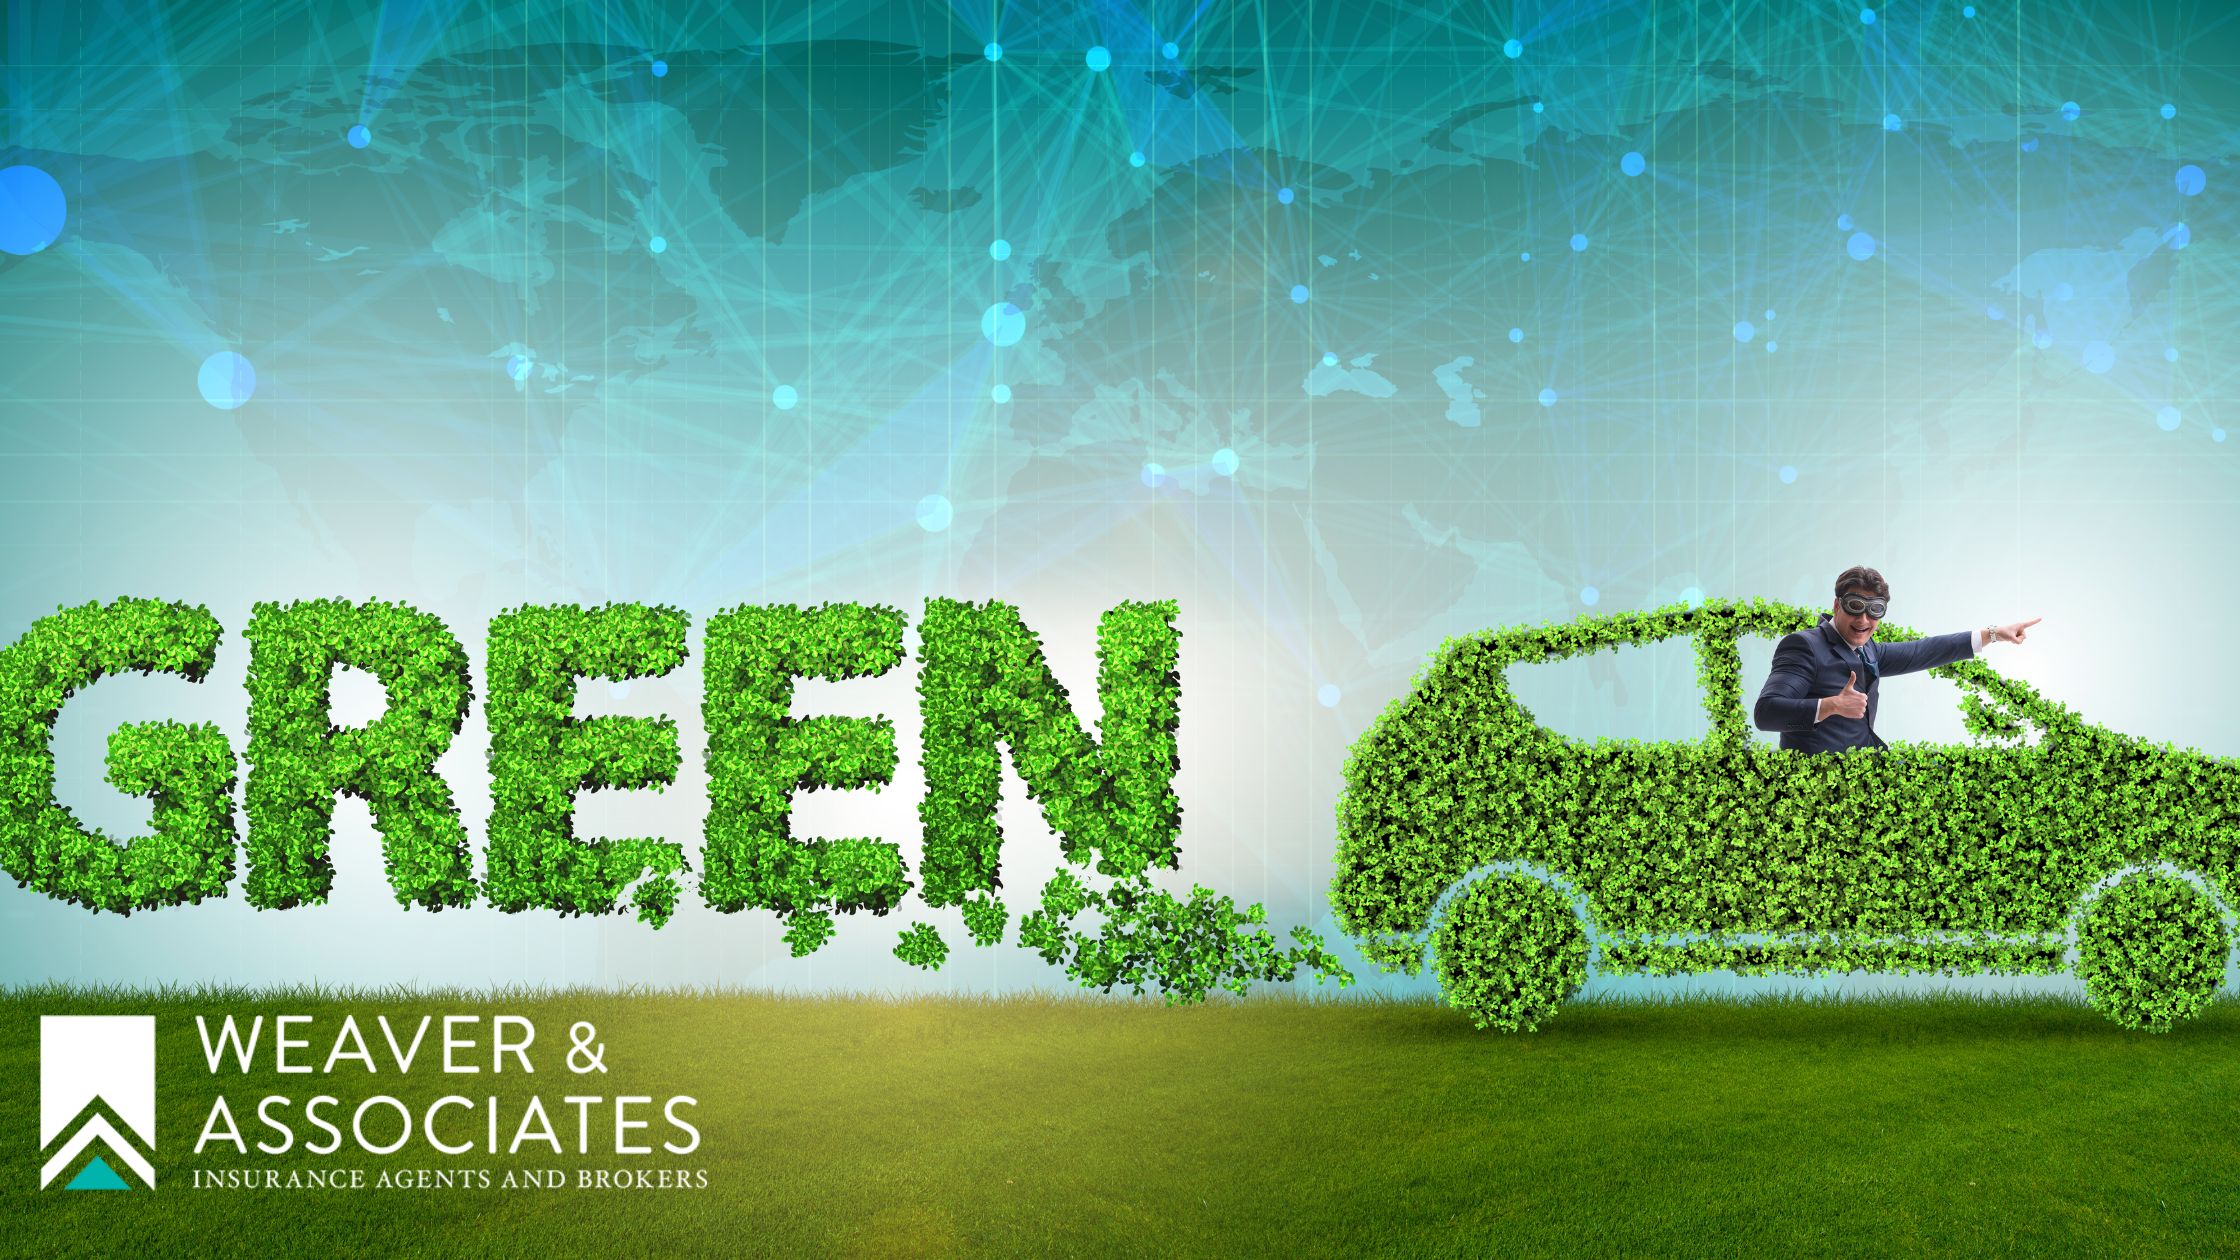 Car Benefit Policies: Reduce Costs & Go Green with Eco-Friendly Car Insurance